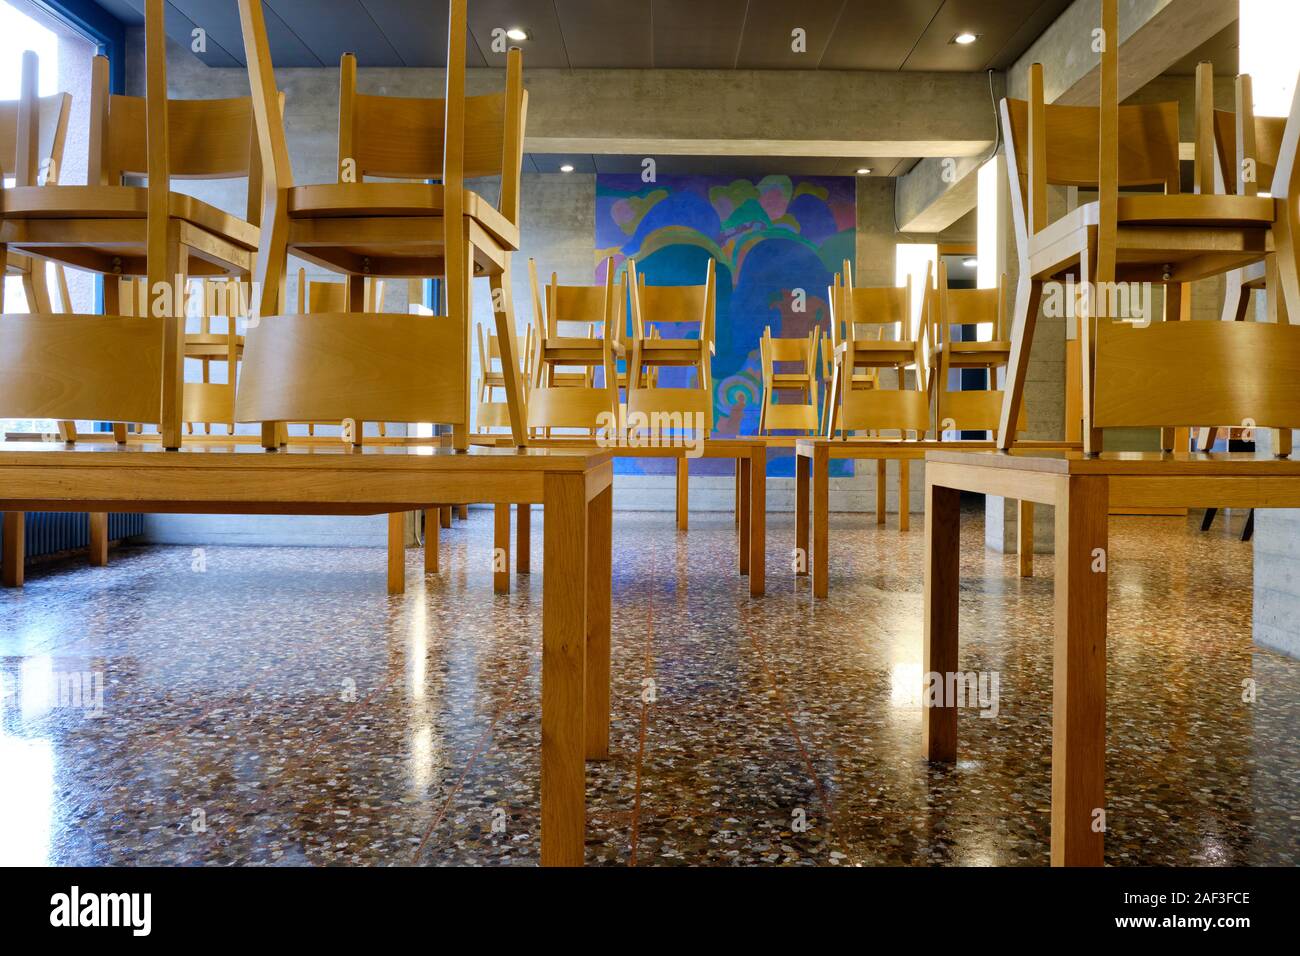 School type cafeteria eating area with all chairs raised on tables for floor cleaning Stock Photo